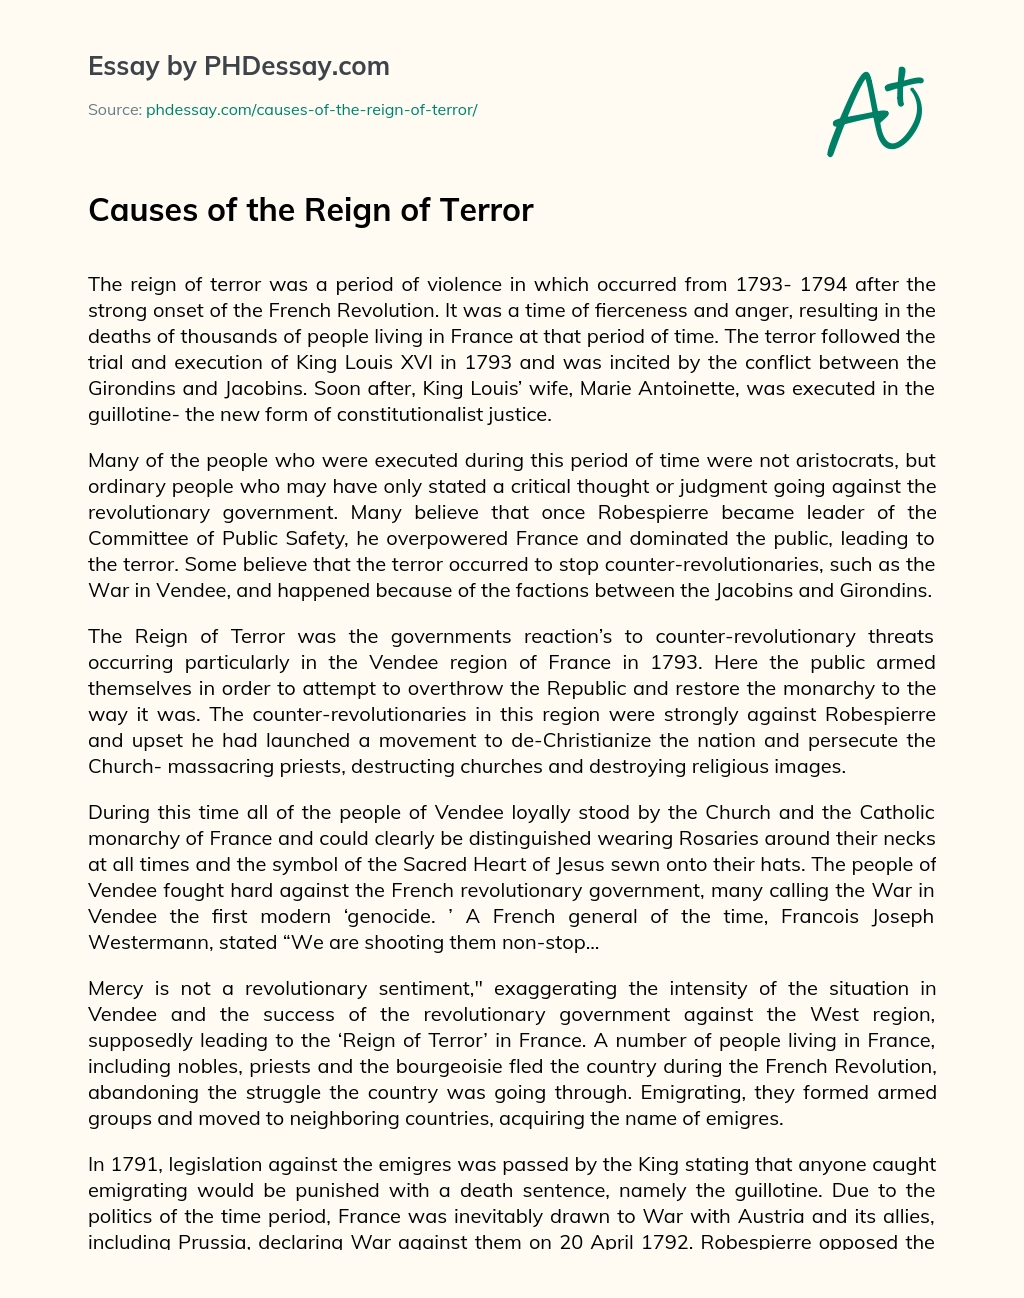 Causes of the Reign of Terror essay